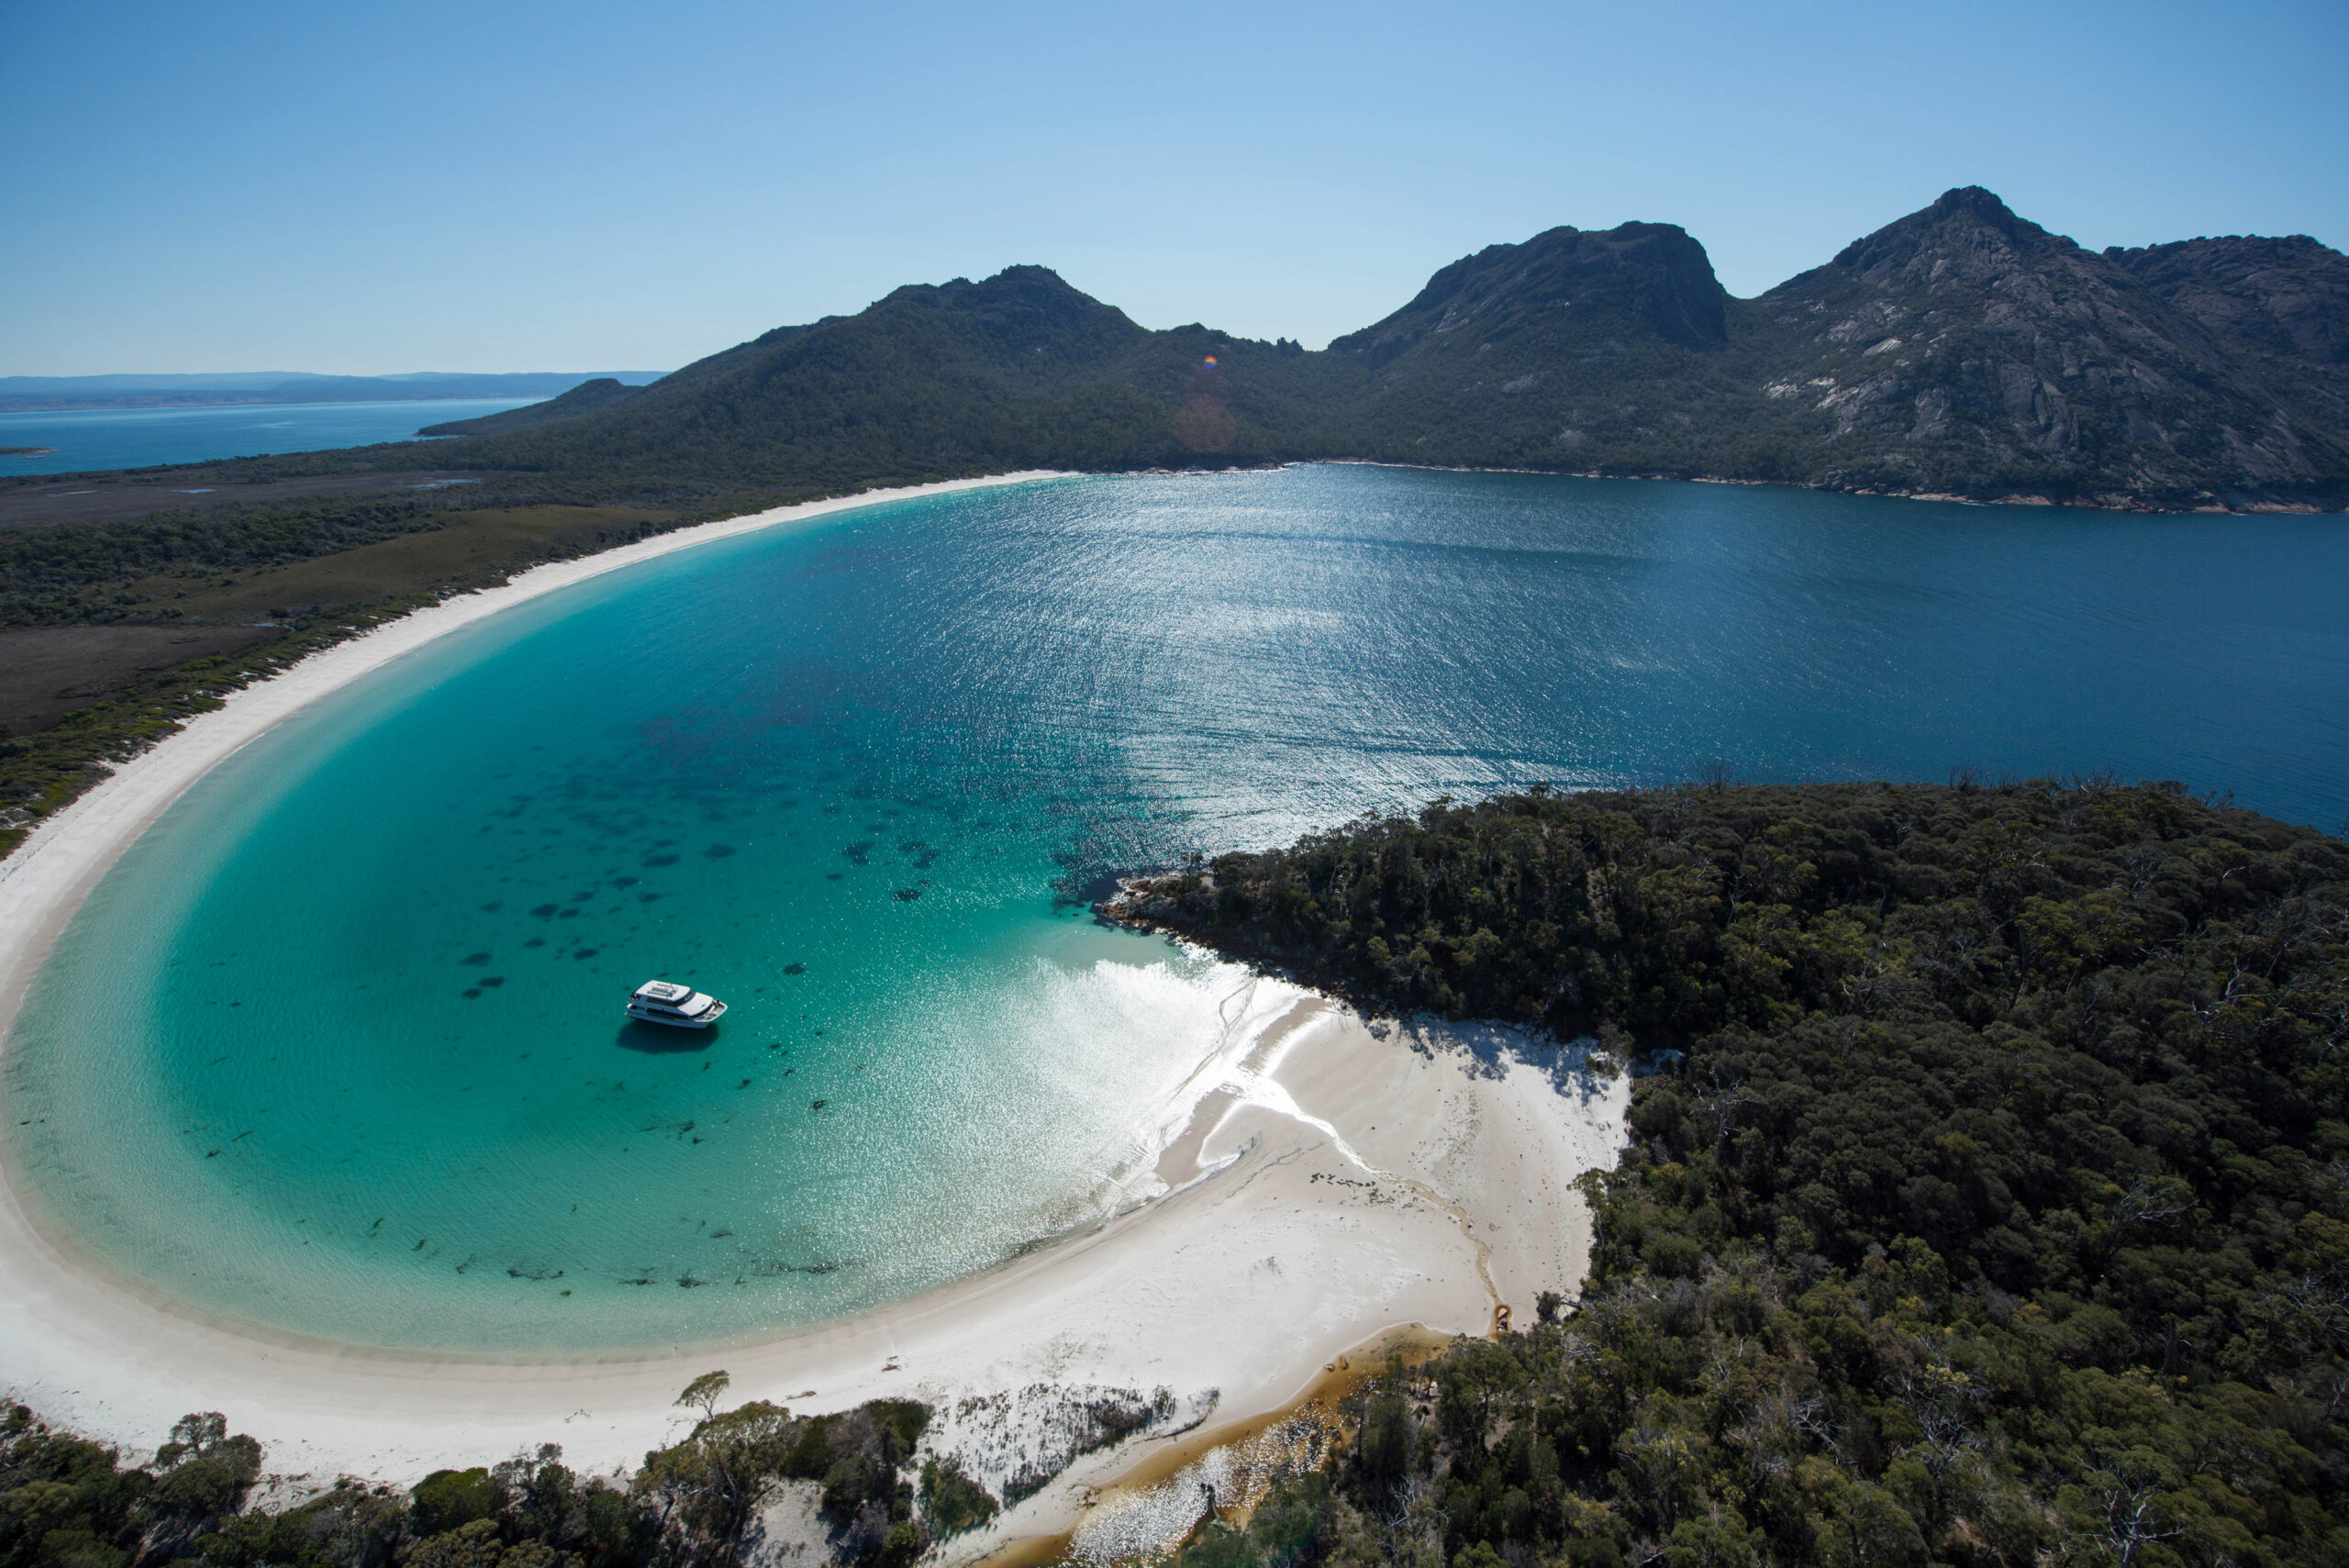 Wineglass Bay Cruises - Vista Lounge (including Ploughmans Lunch)